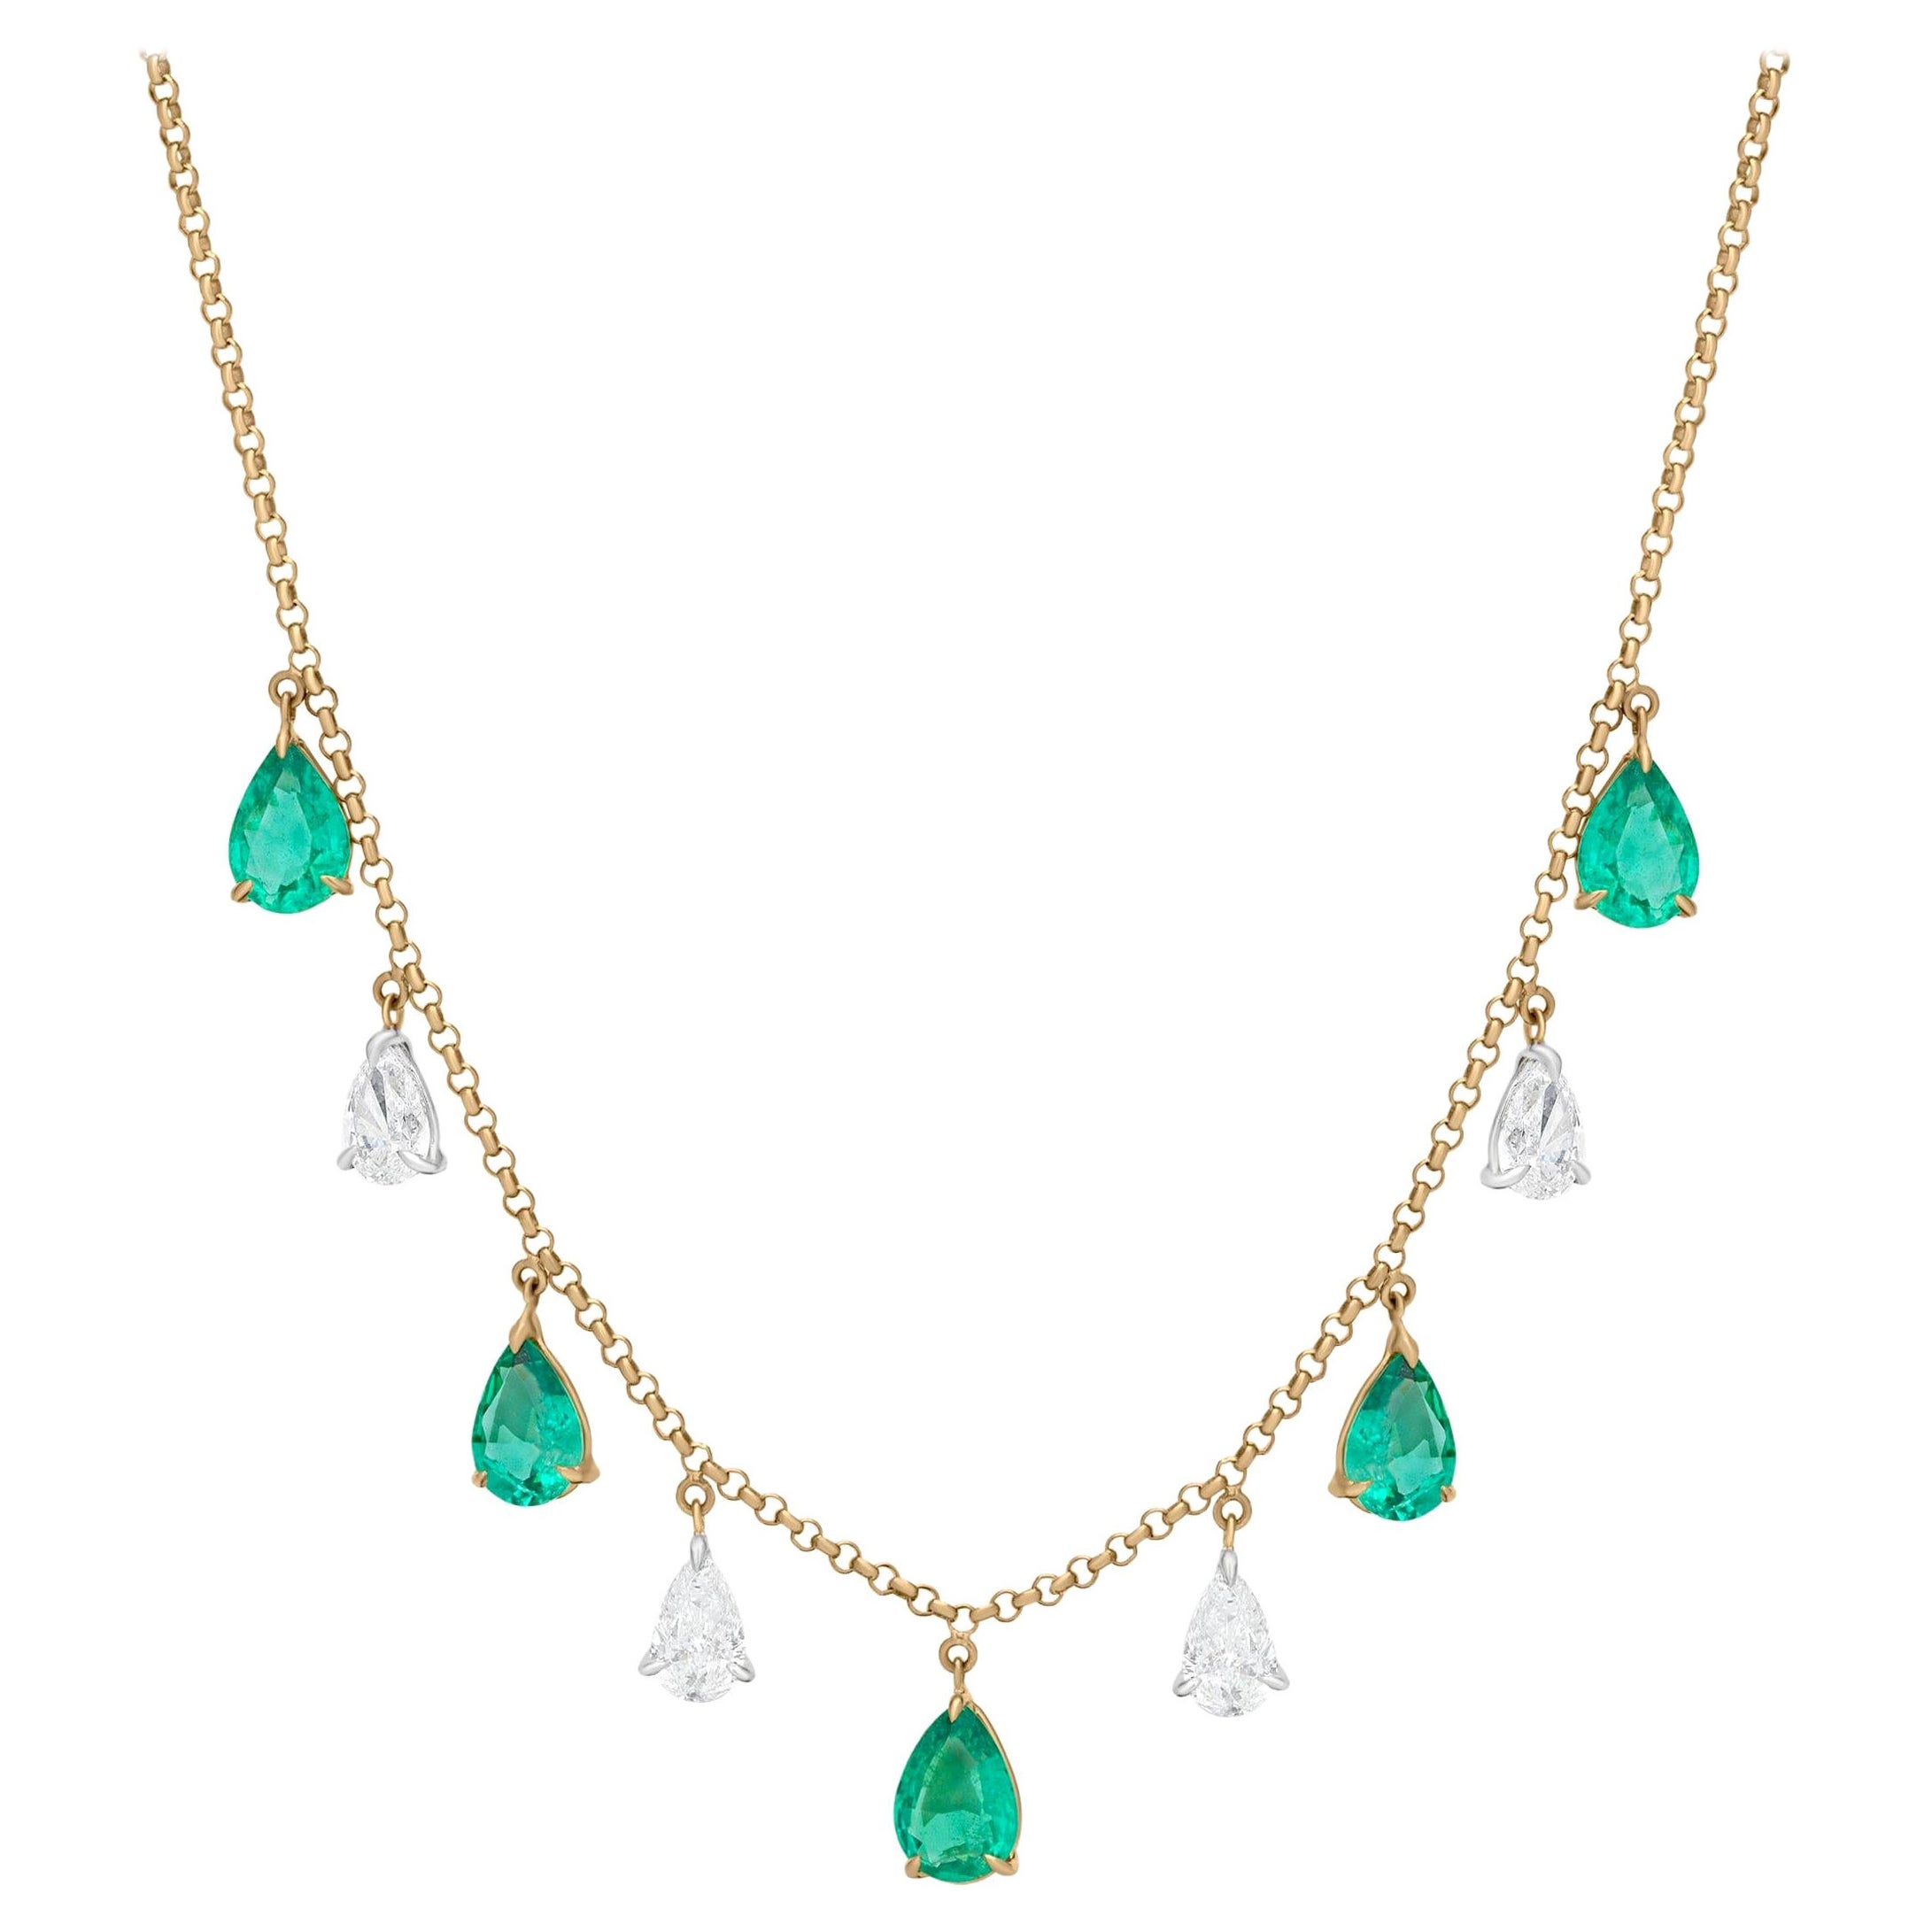 Nigaam 3.51cttw Pear-Shaped Emerald & Diamond Drop Necklace in 18k Yellow Gold